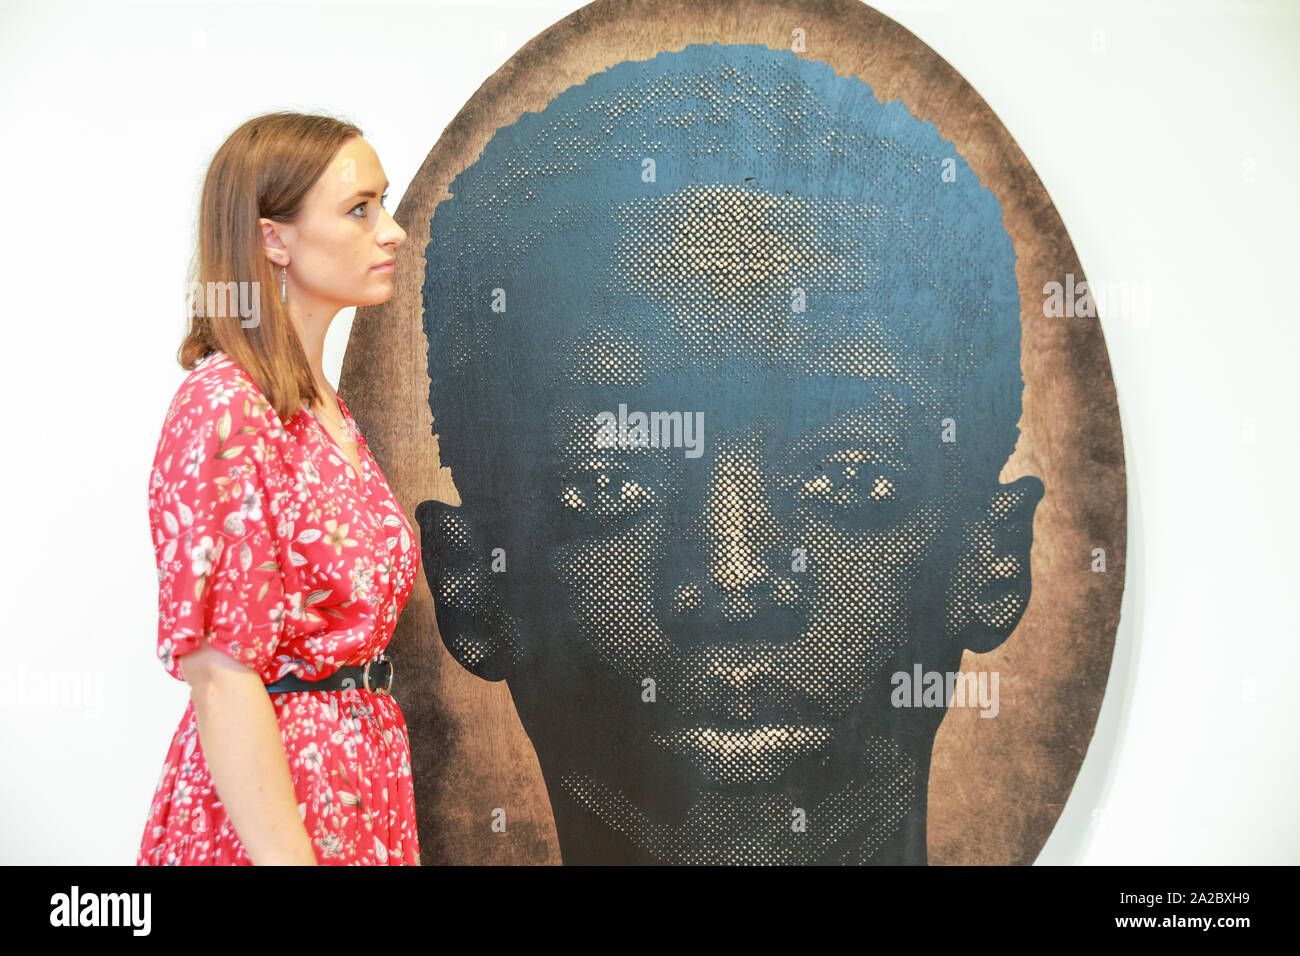 Somerset House, London, UK, 02 Oct 2019. An assistant poses with Alexis Peskine's work 'Dexu Adüna', (2019)',which deals with racian and ethnic identity. Somerset House, in partnership with 1-54, presents the Contemporary African Art Fair, now in its 7th year at Somerset House. The Fair runs from Oct 3-6 and brings together 45 leading galleries with over 140 artists. Credit: Imageplotter/Alamy Live News Stock Photo